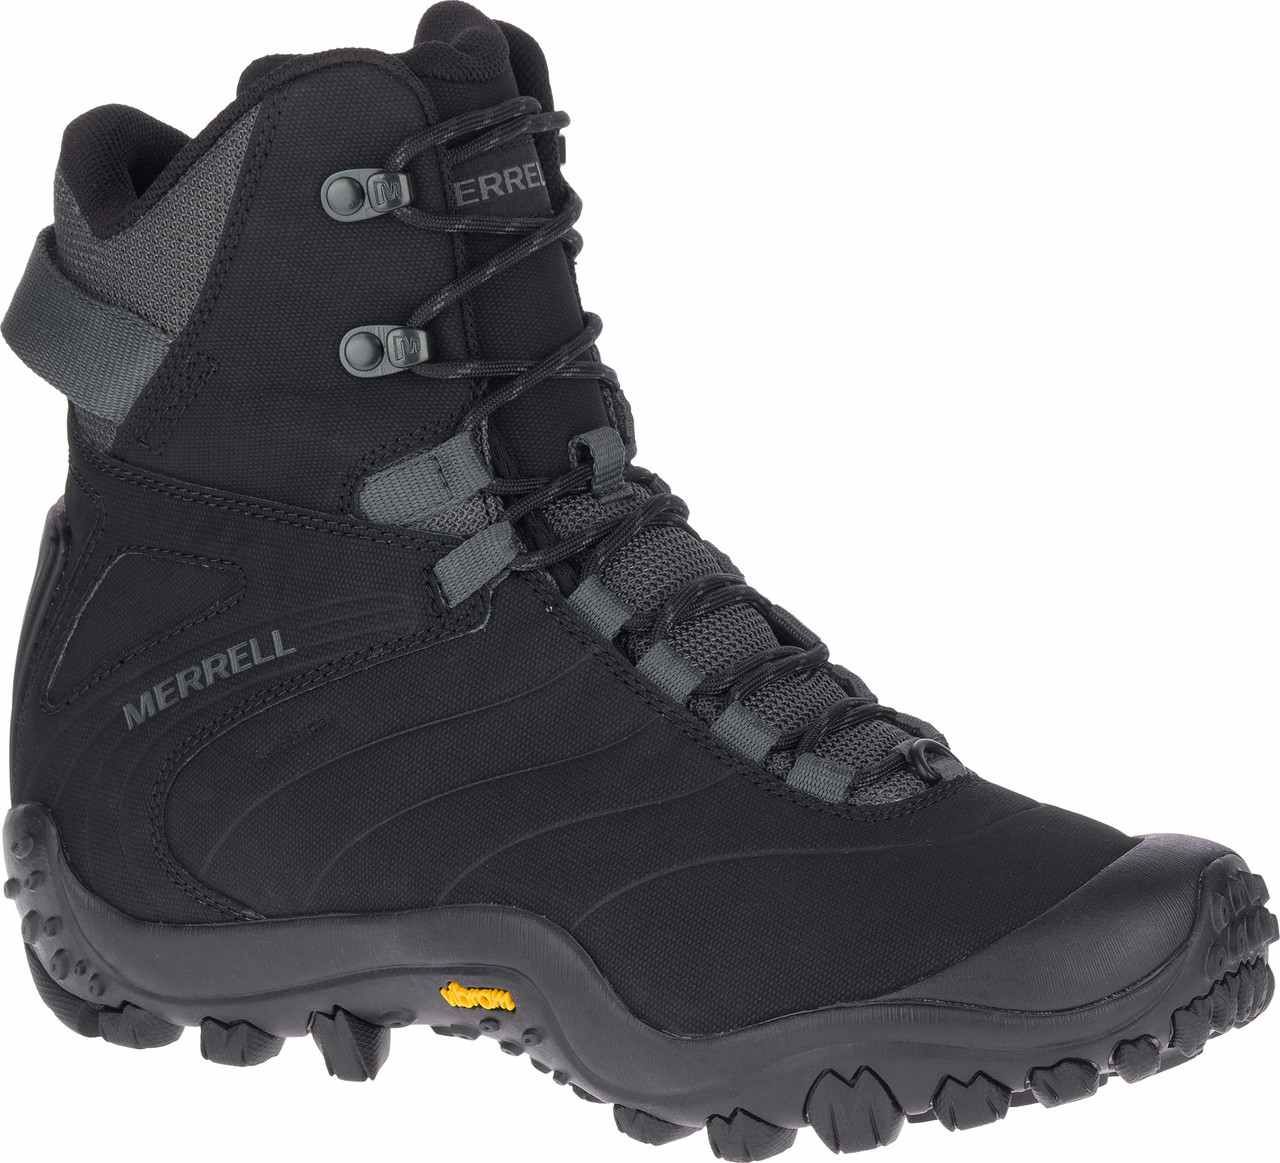 Cham 8 Thermo Tall Waterproof Winter Boots Black/Rock